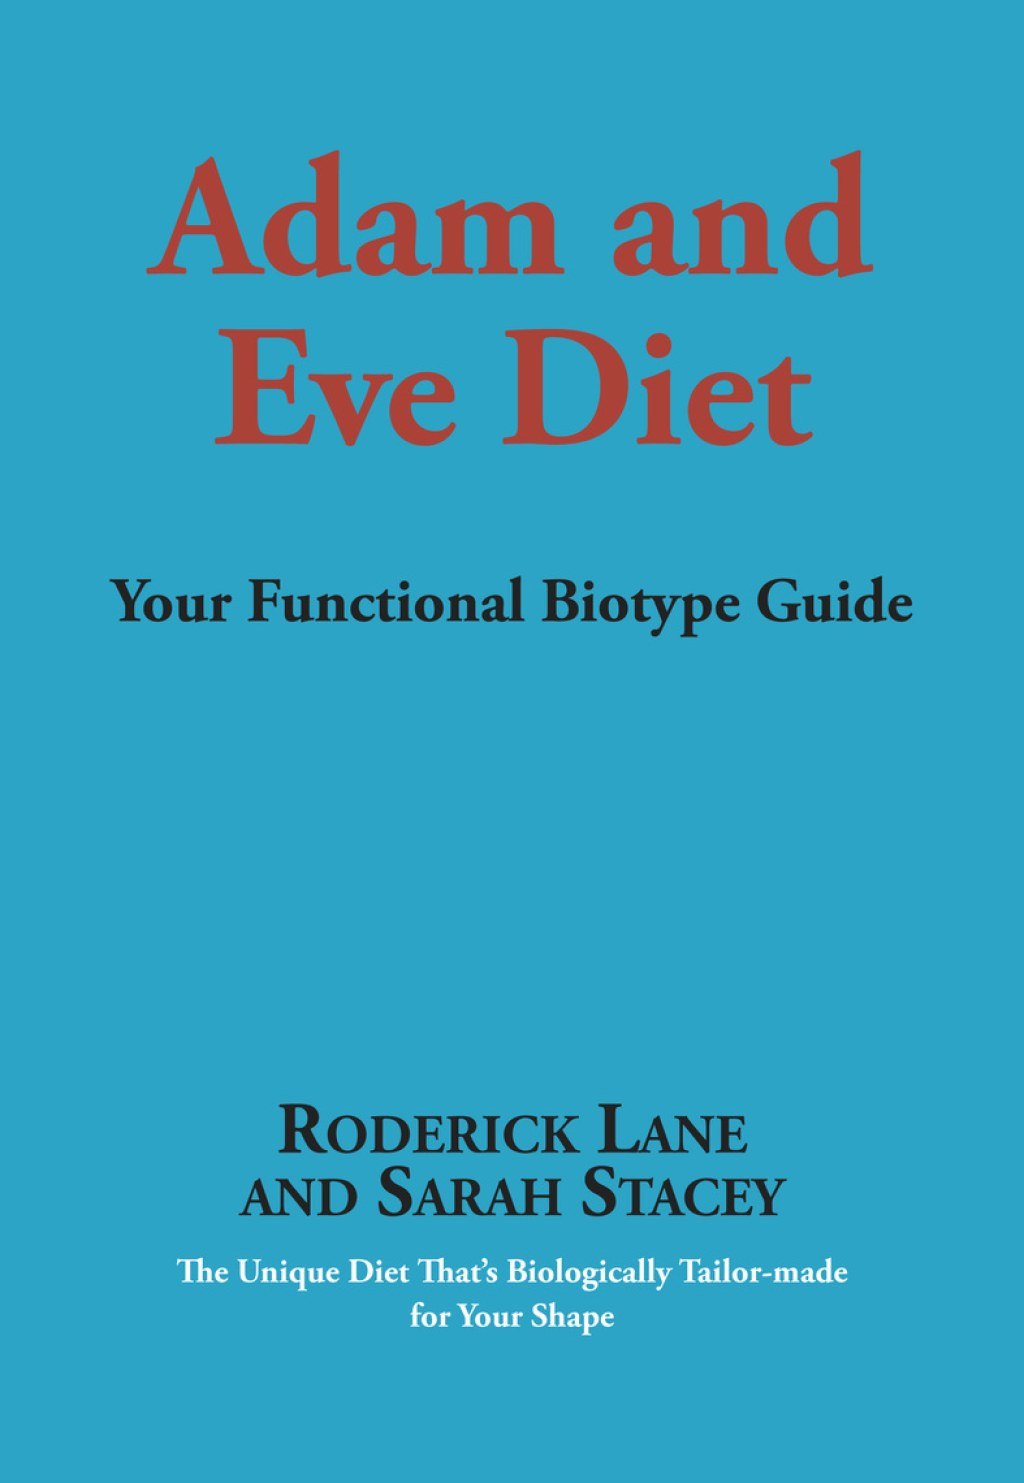 Picture of: Adam and Eve Diet by Roderick Lane – Ebook  Scribd